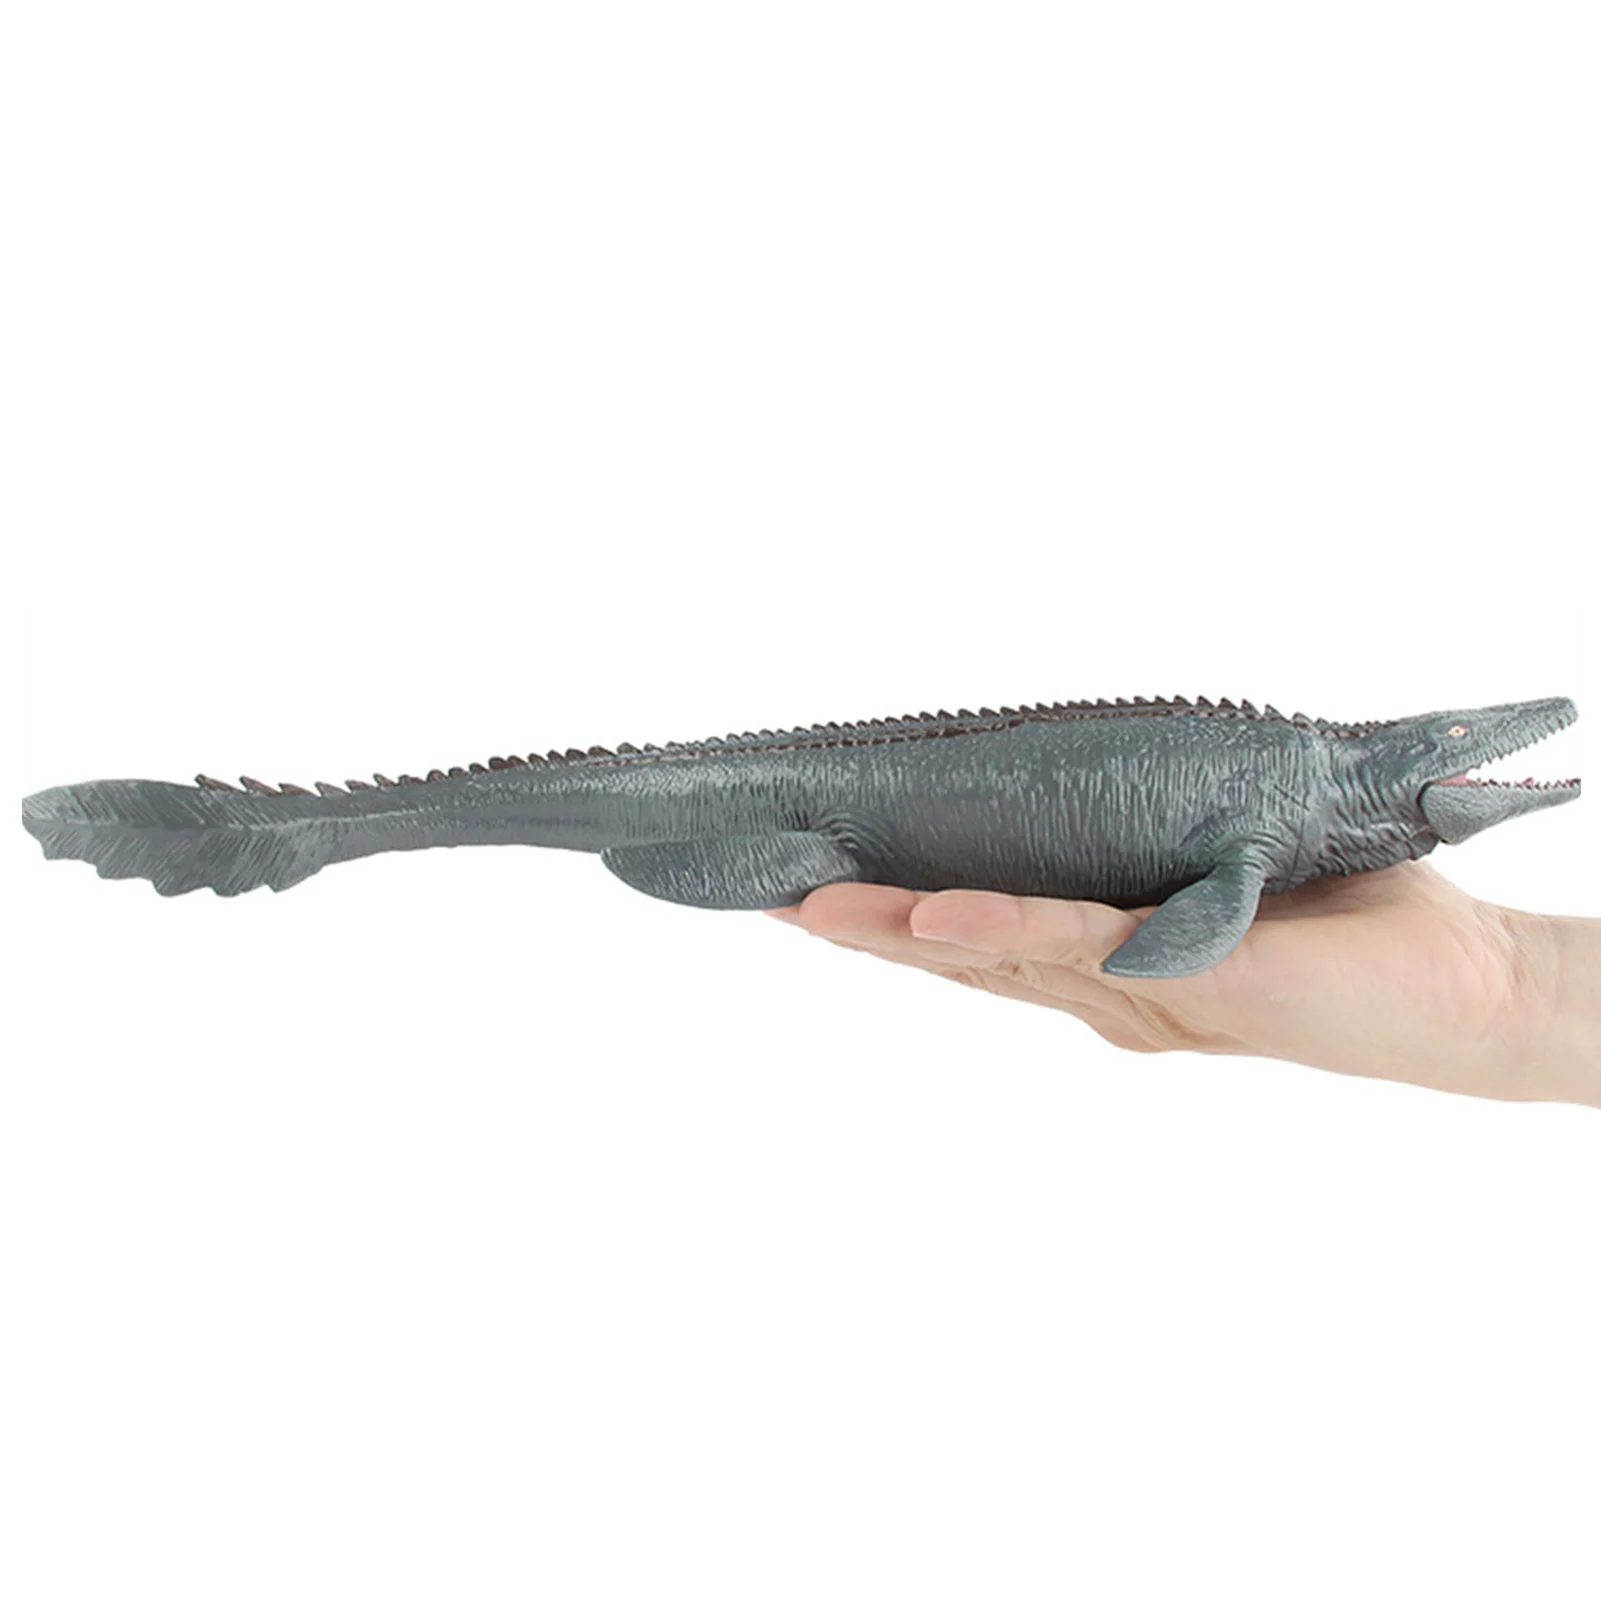 

Realistic Mosasaurus Dinosaur Toy With Movable Jaw Waterborne Paint Large Animal Action Figure Model For Kids Birthday Gifts